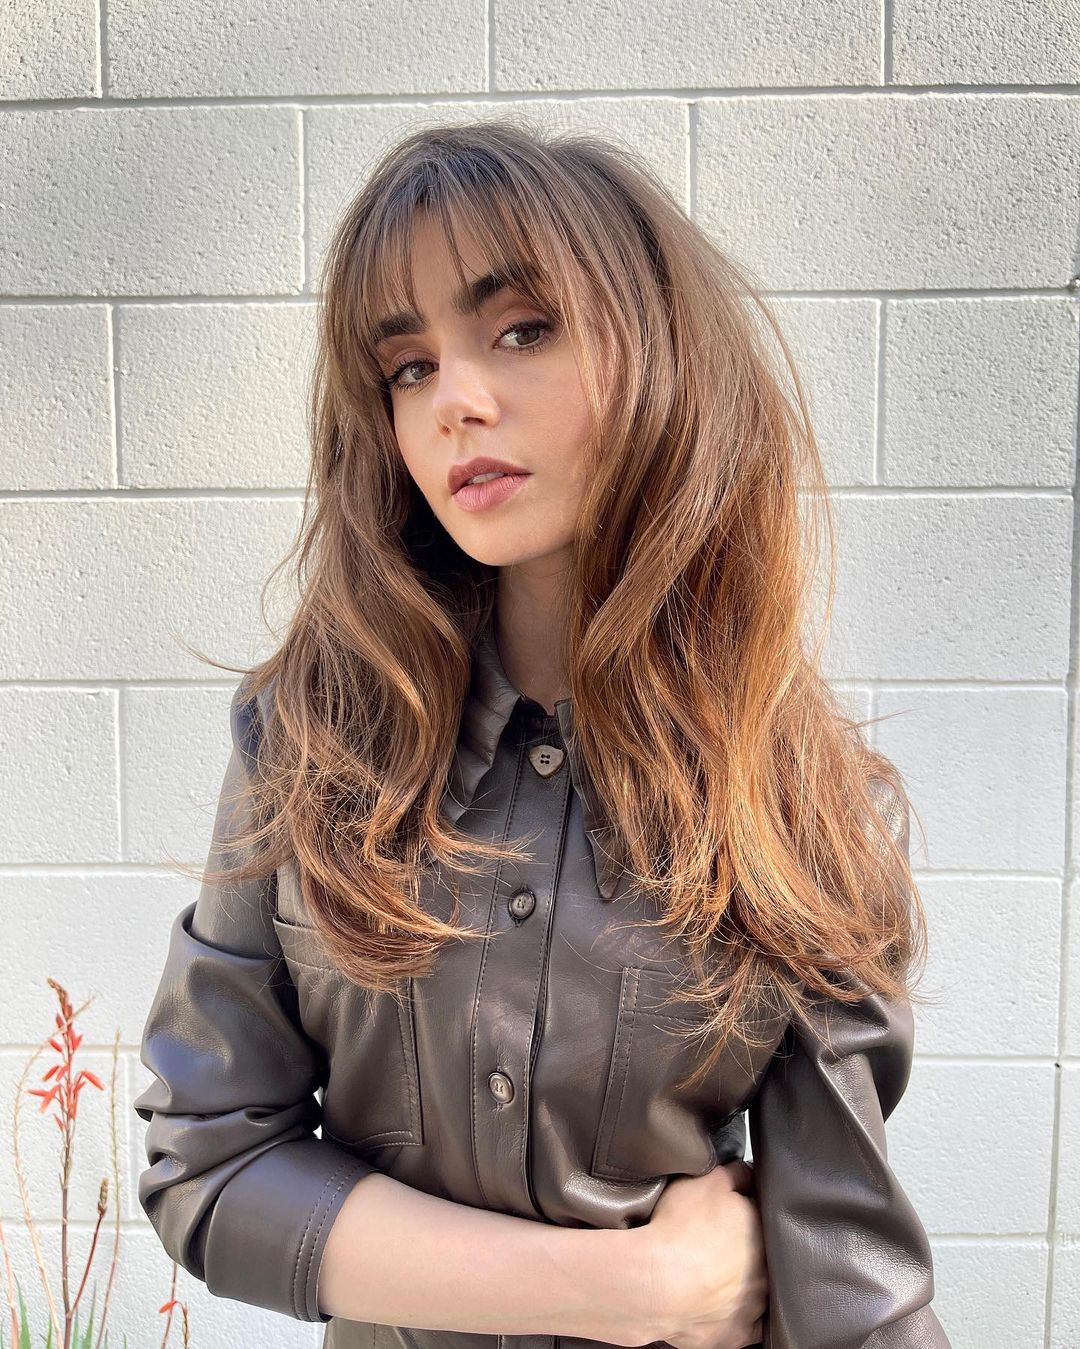 Lily Collins in a haircut with Bangs